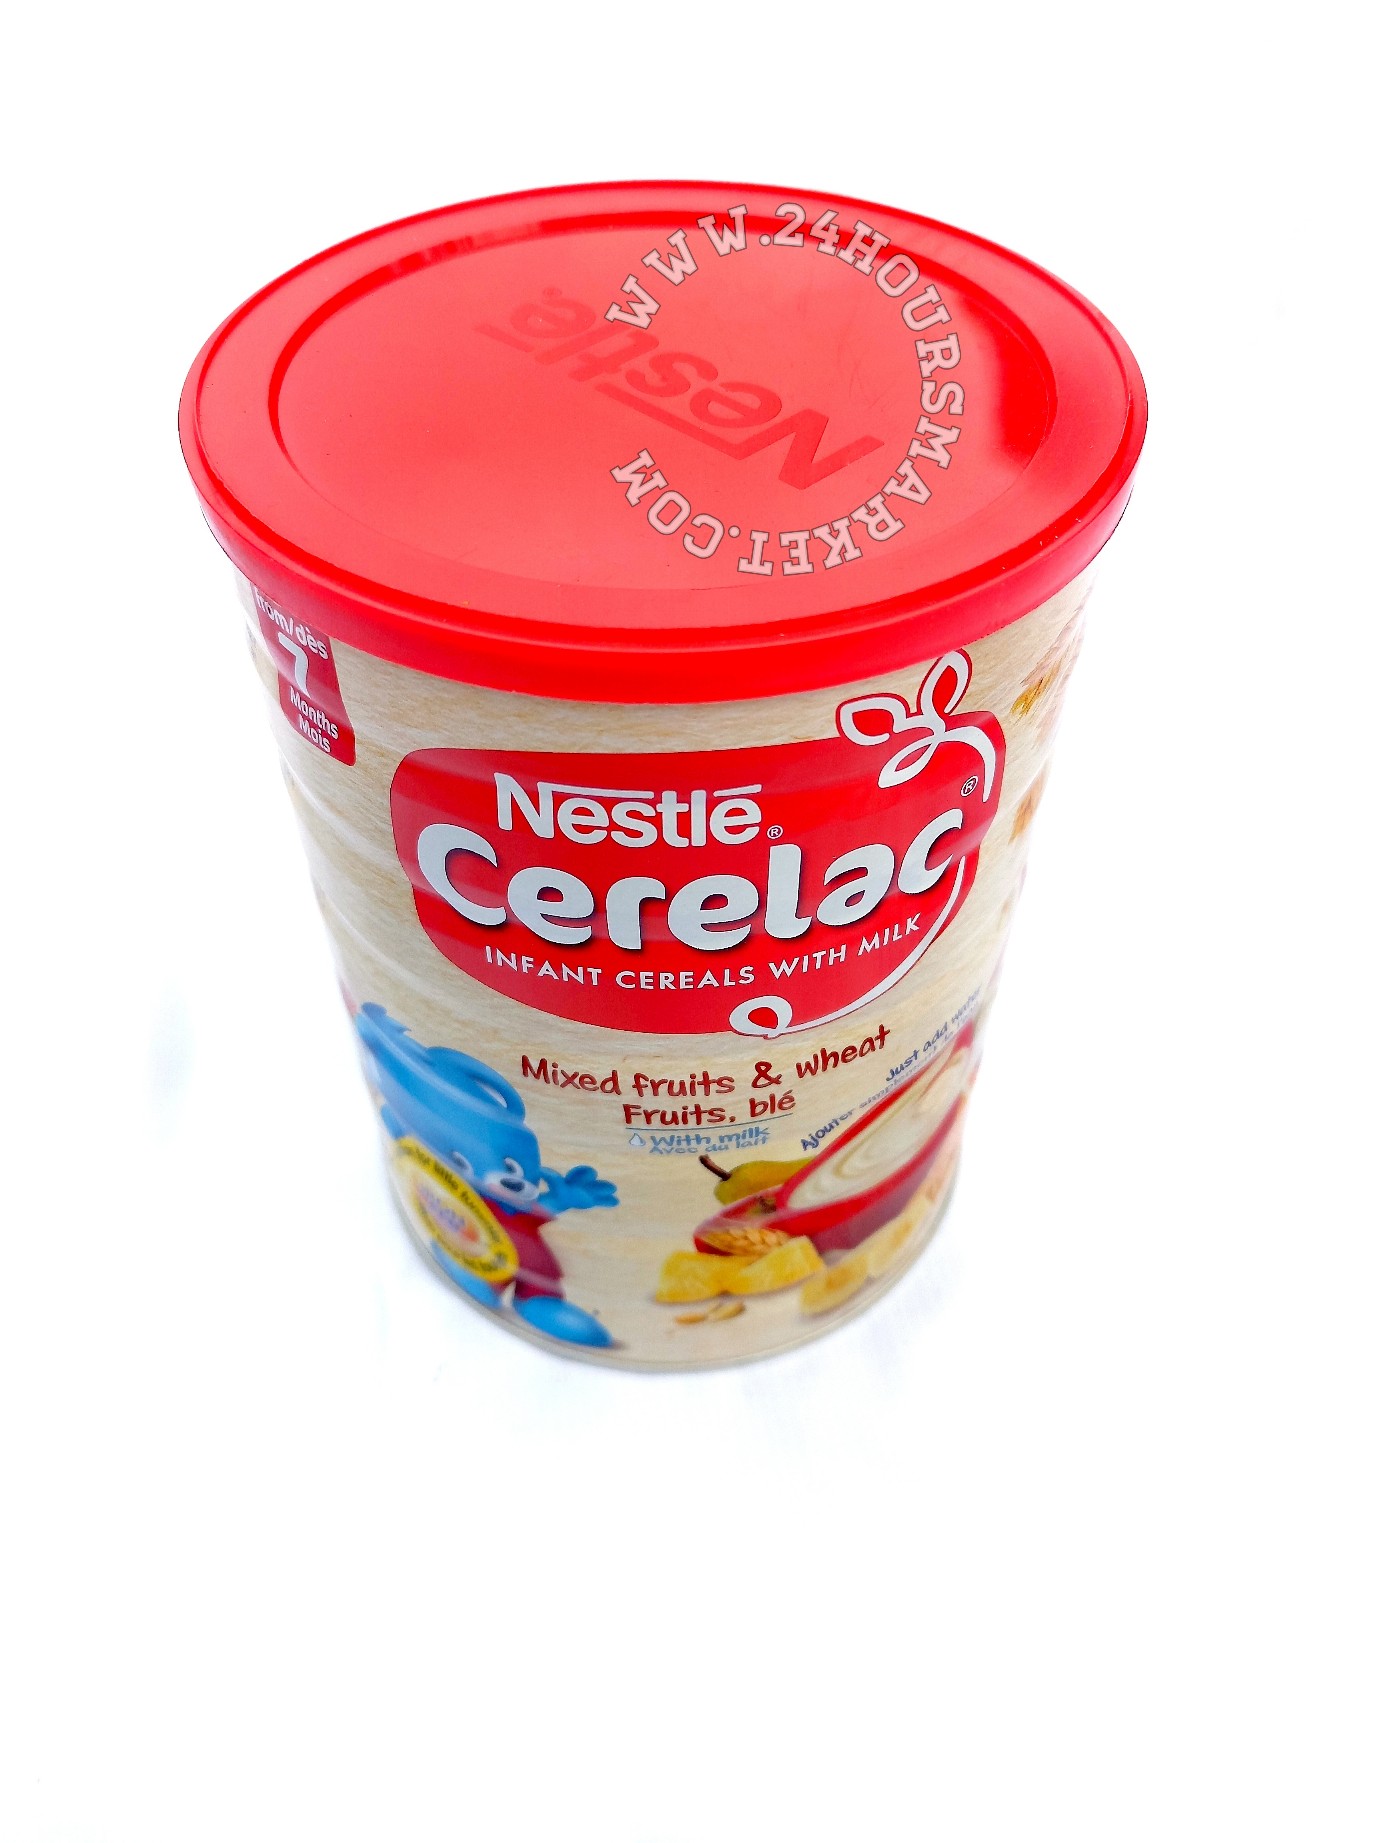 Nestlé CERELAC – mixed fruits and wheat fruits, ble. 1kg